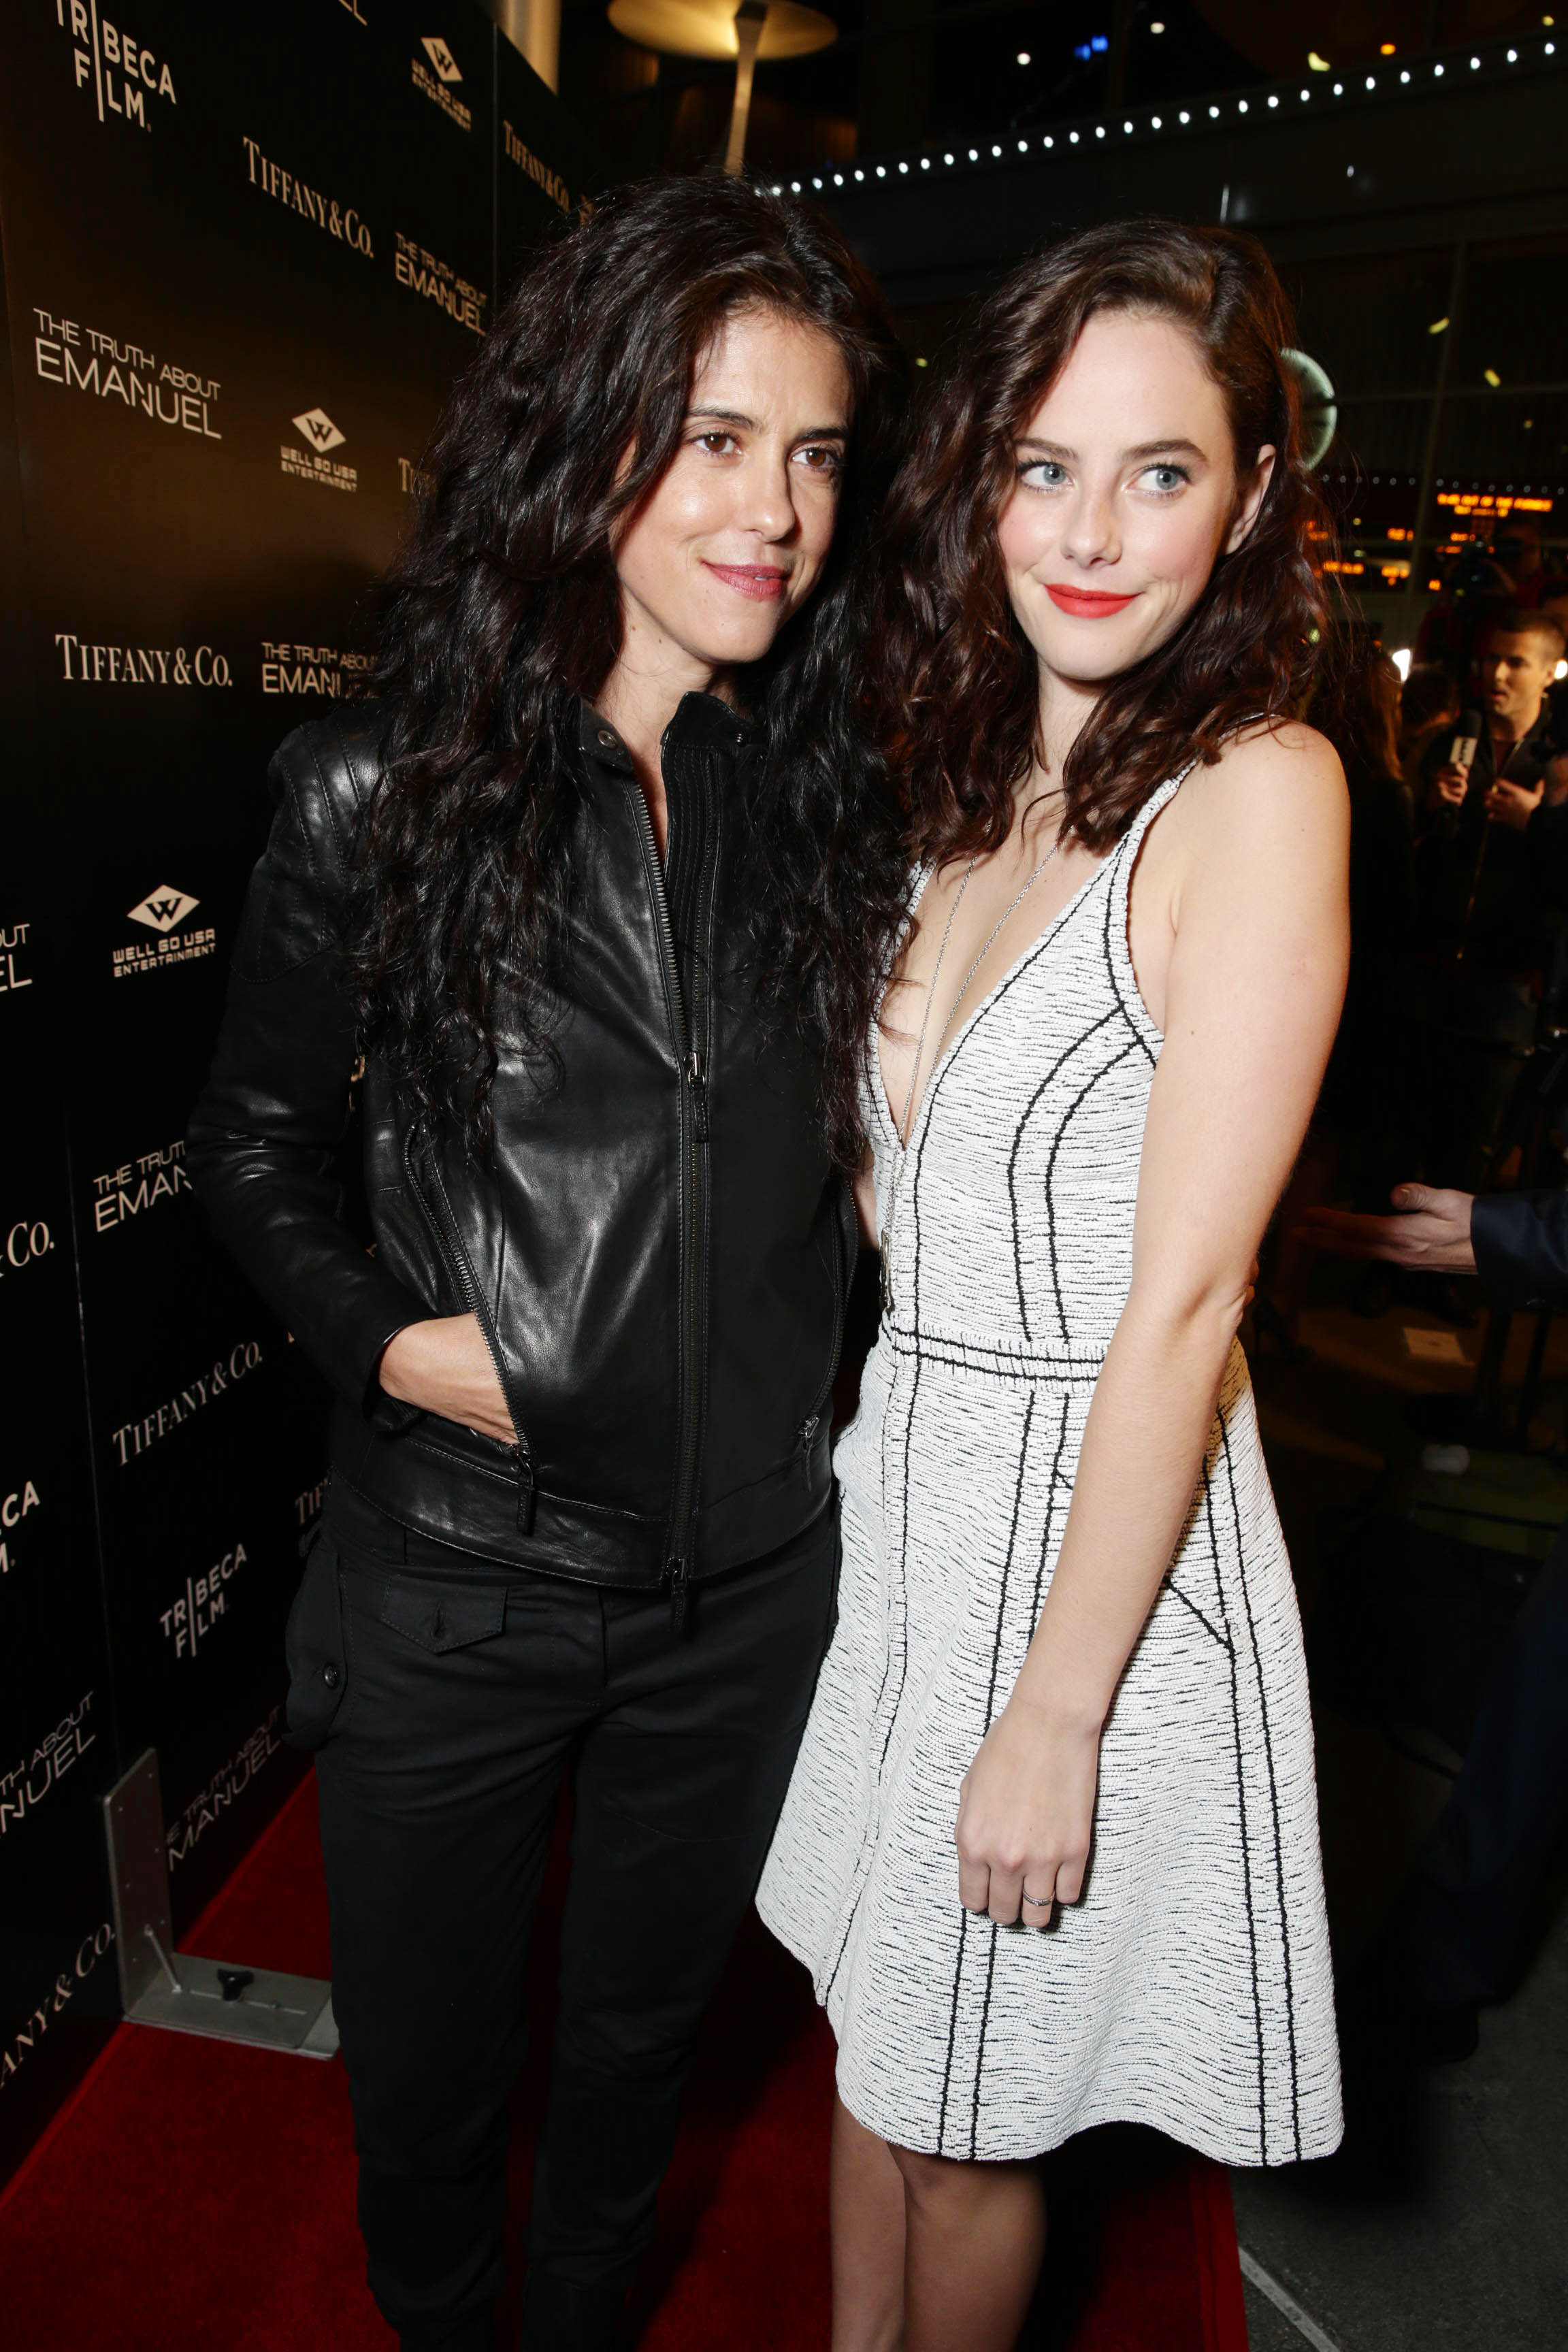 Francesca Gregorini and Kaya Scodelario on the red carpet for The Truth About Emanuel